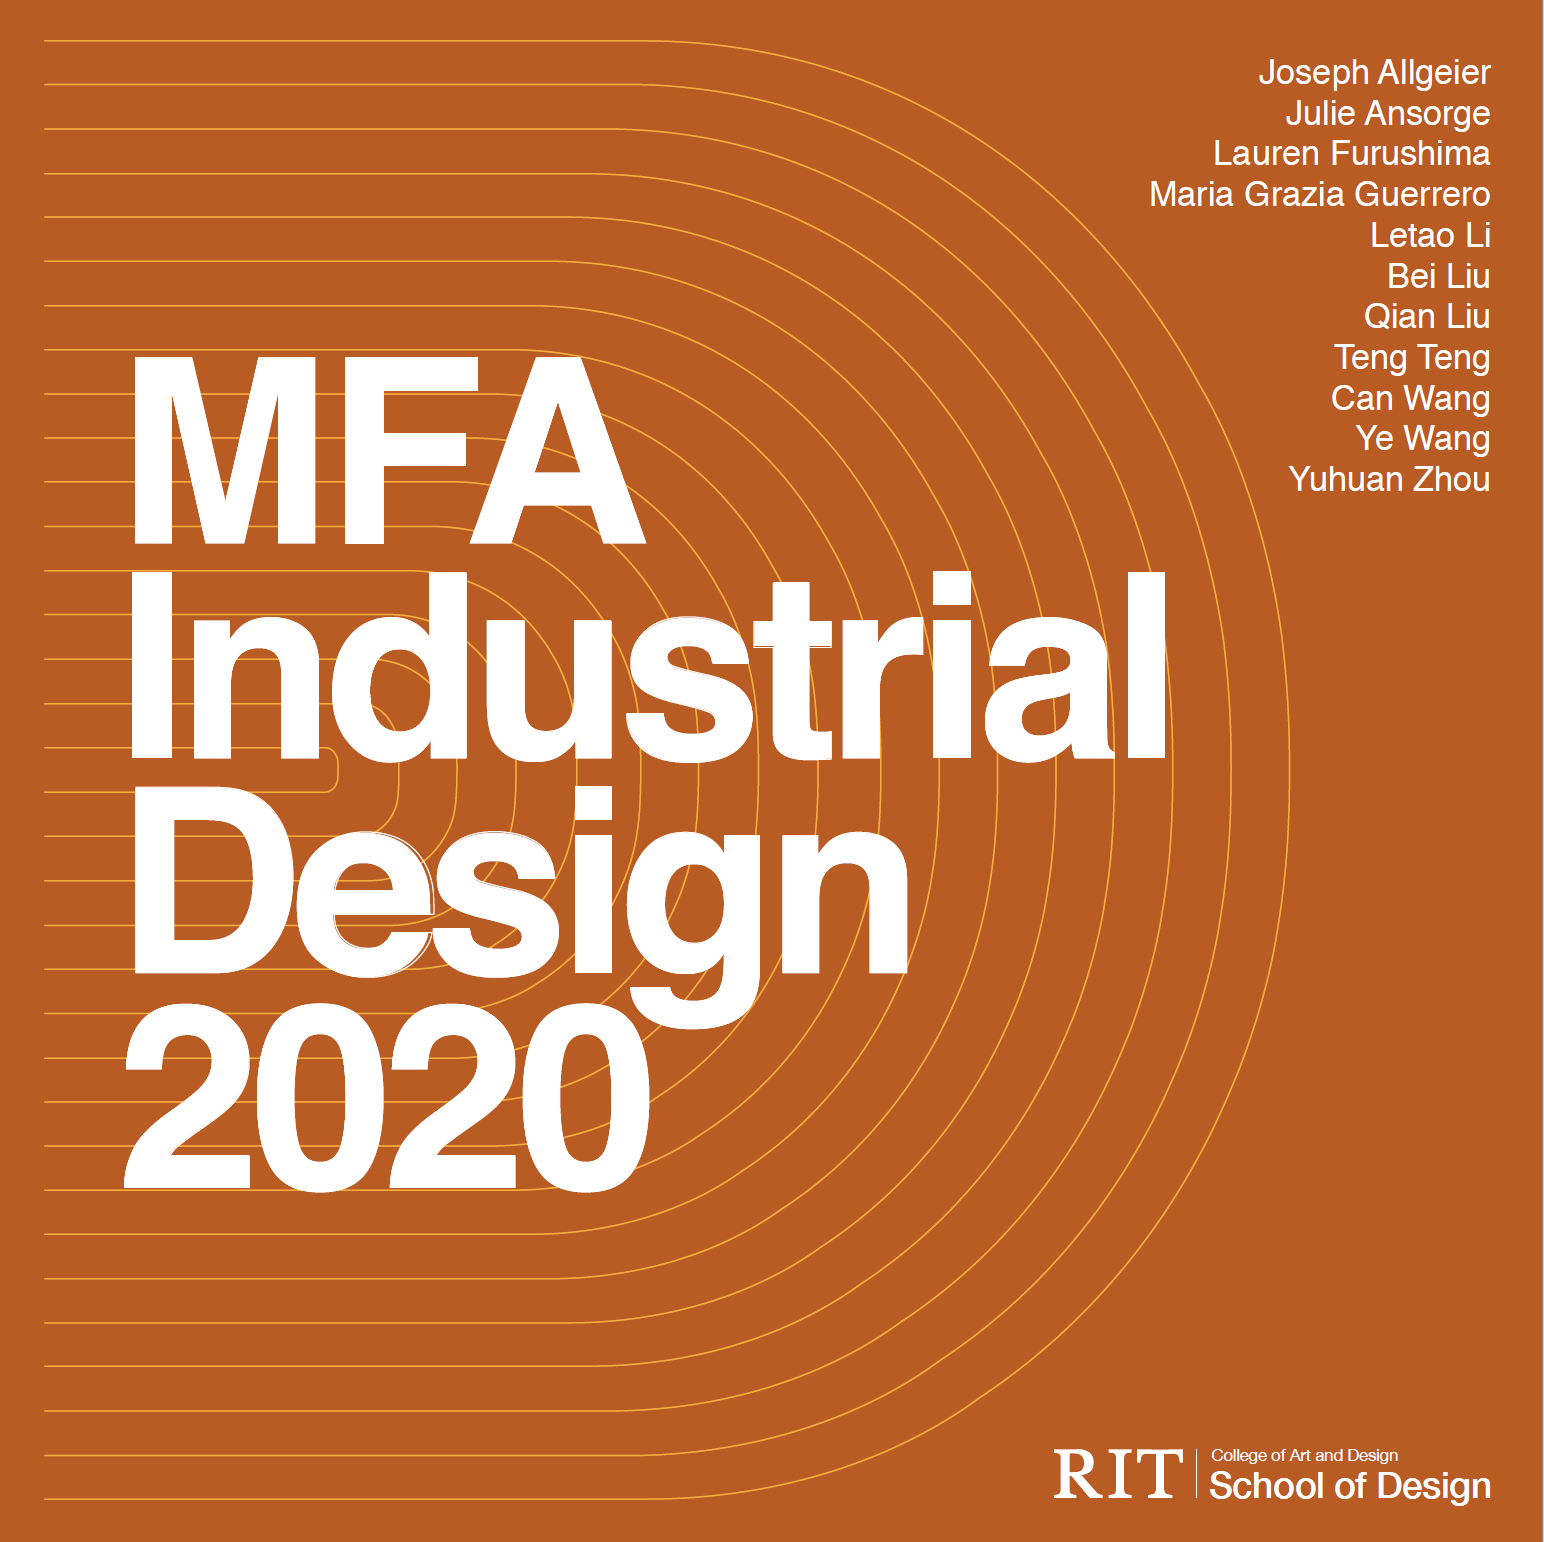 MFA Industrial Design 2020 show poster